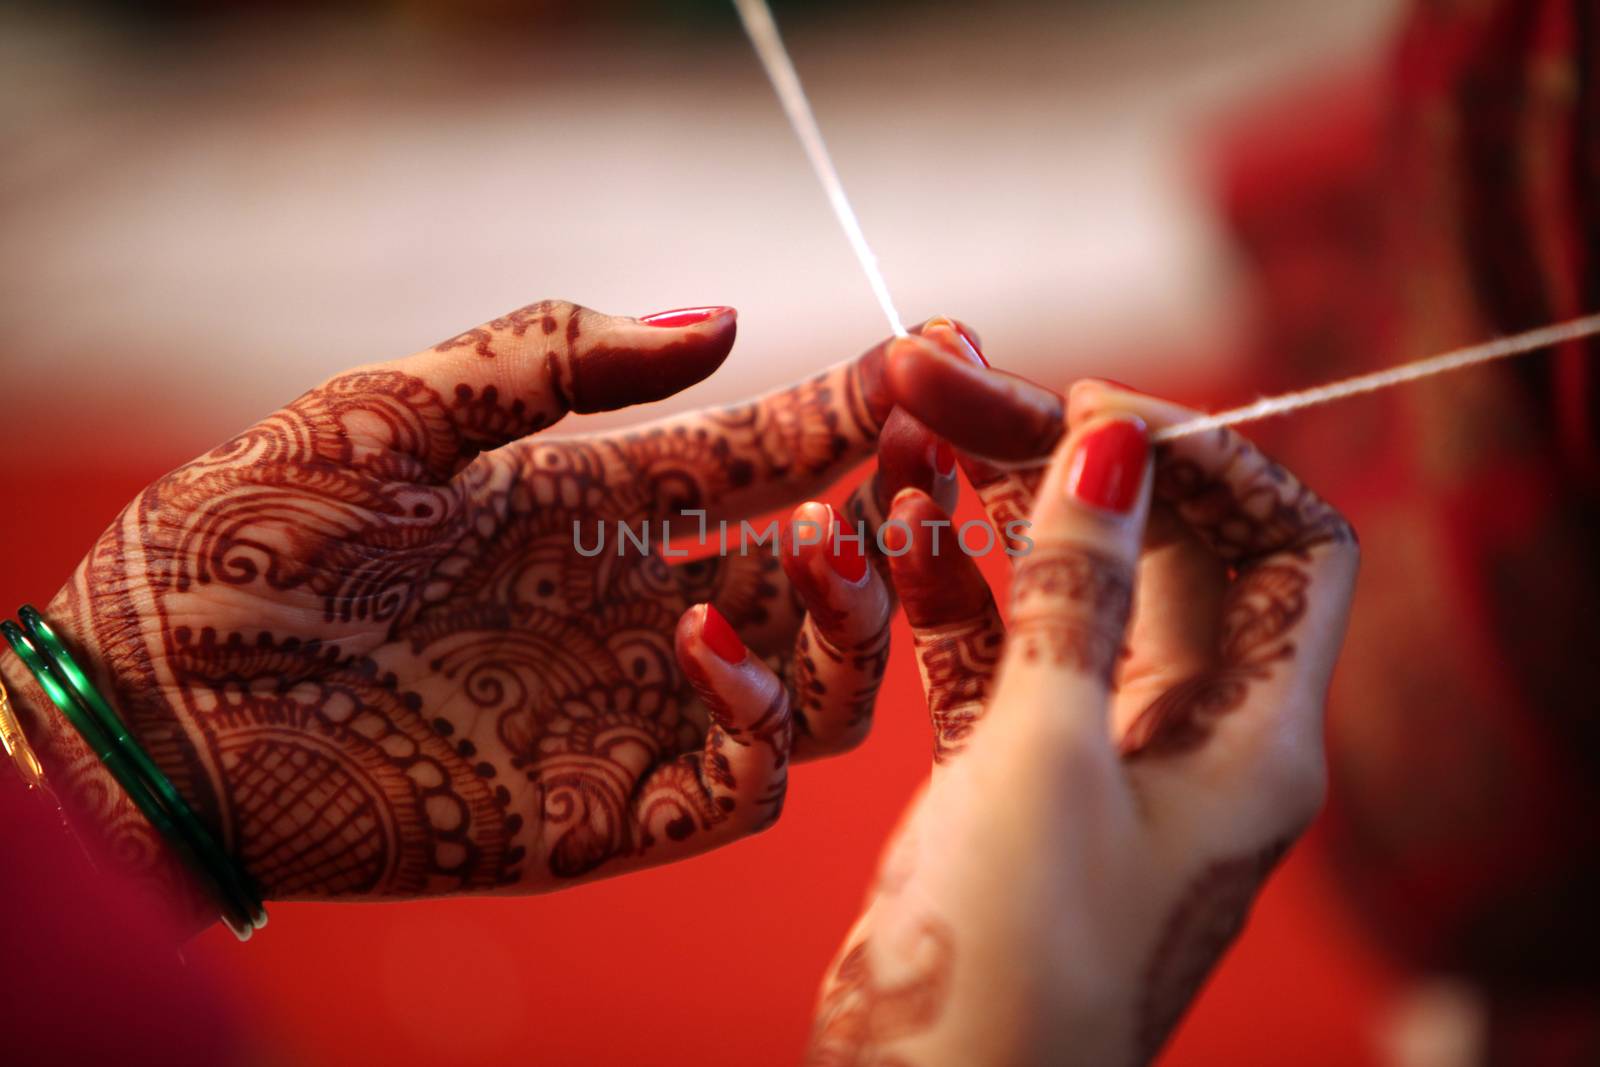 A religious thread held tight in the hands of a relative during a traditional hindu wedding ceremony.